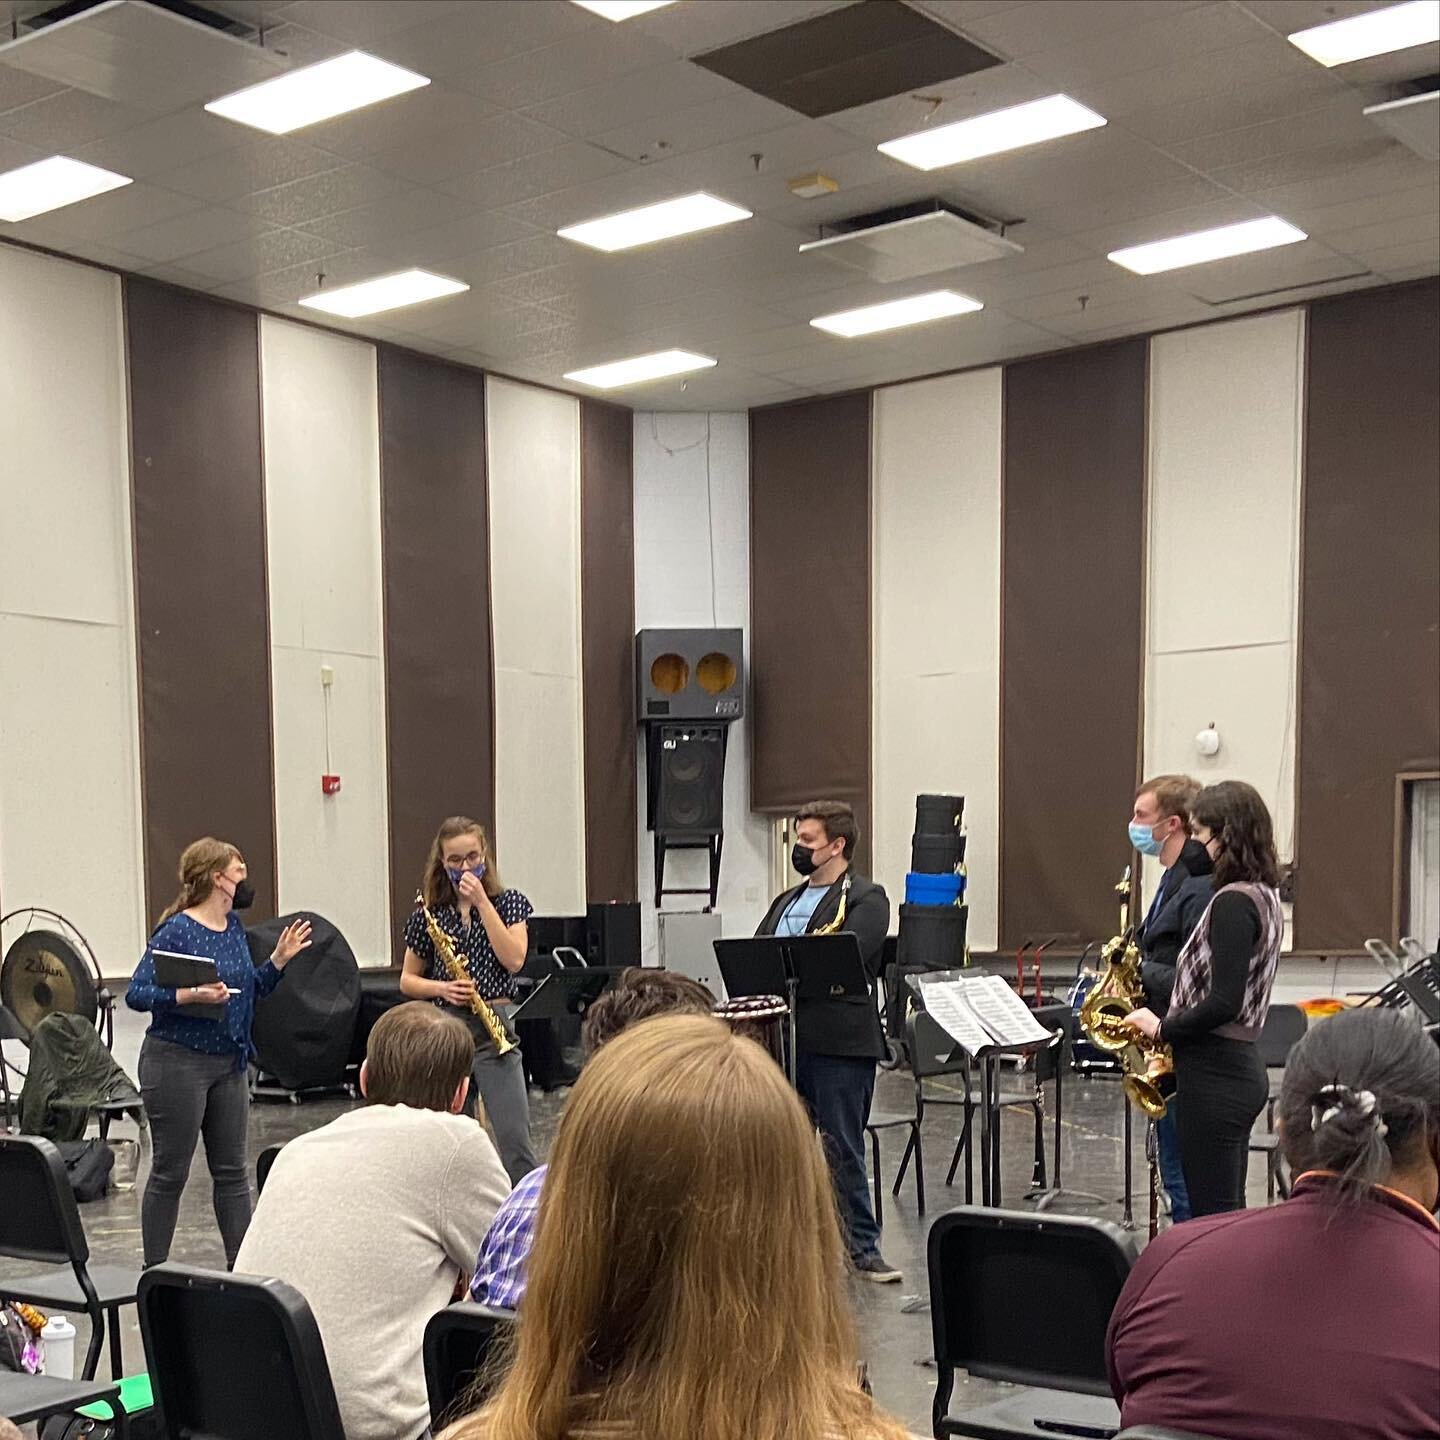 We had a great time working with students at the University of Memphis yesterday and today, coaching chamber groups and speaking with a career resources class about our careers in chamber music!

#windquintet #ontour #memphis #universityofmemphis #ch